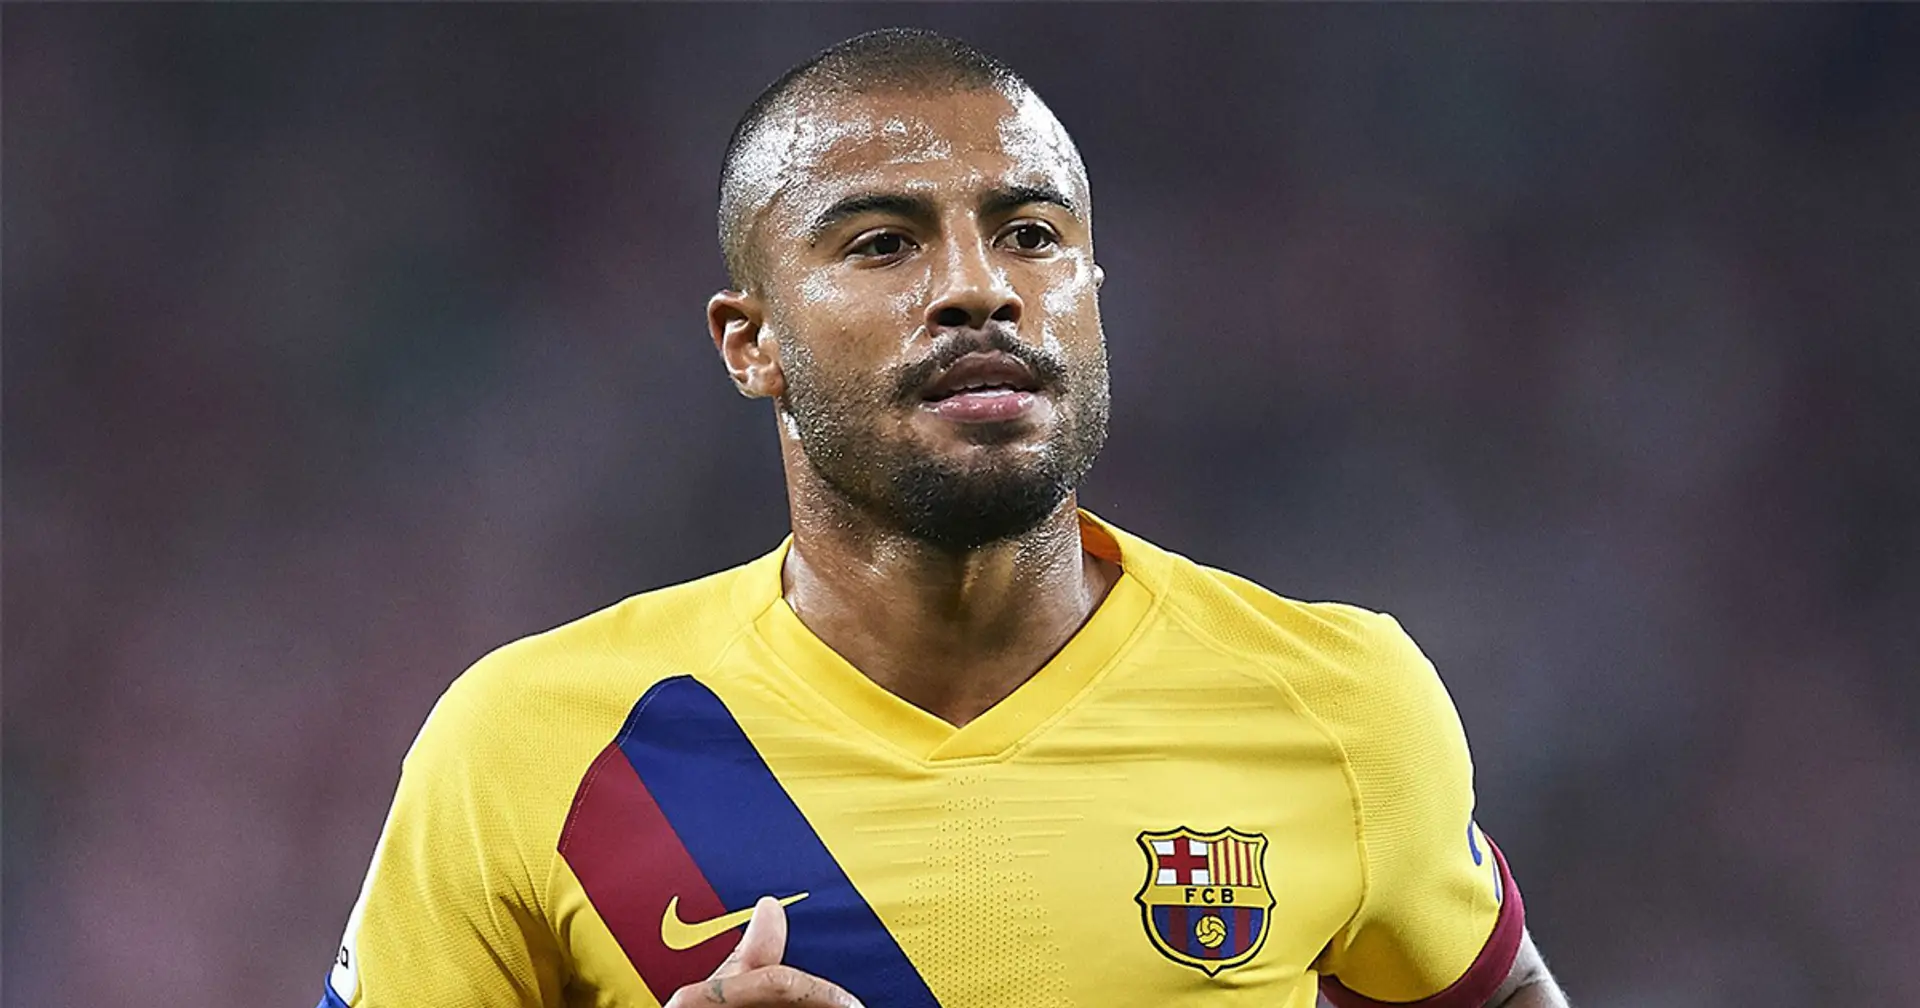 Barcelona and PSG negotiating over Rafinha's move (reliability: 5 stars)